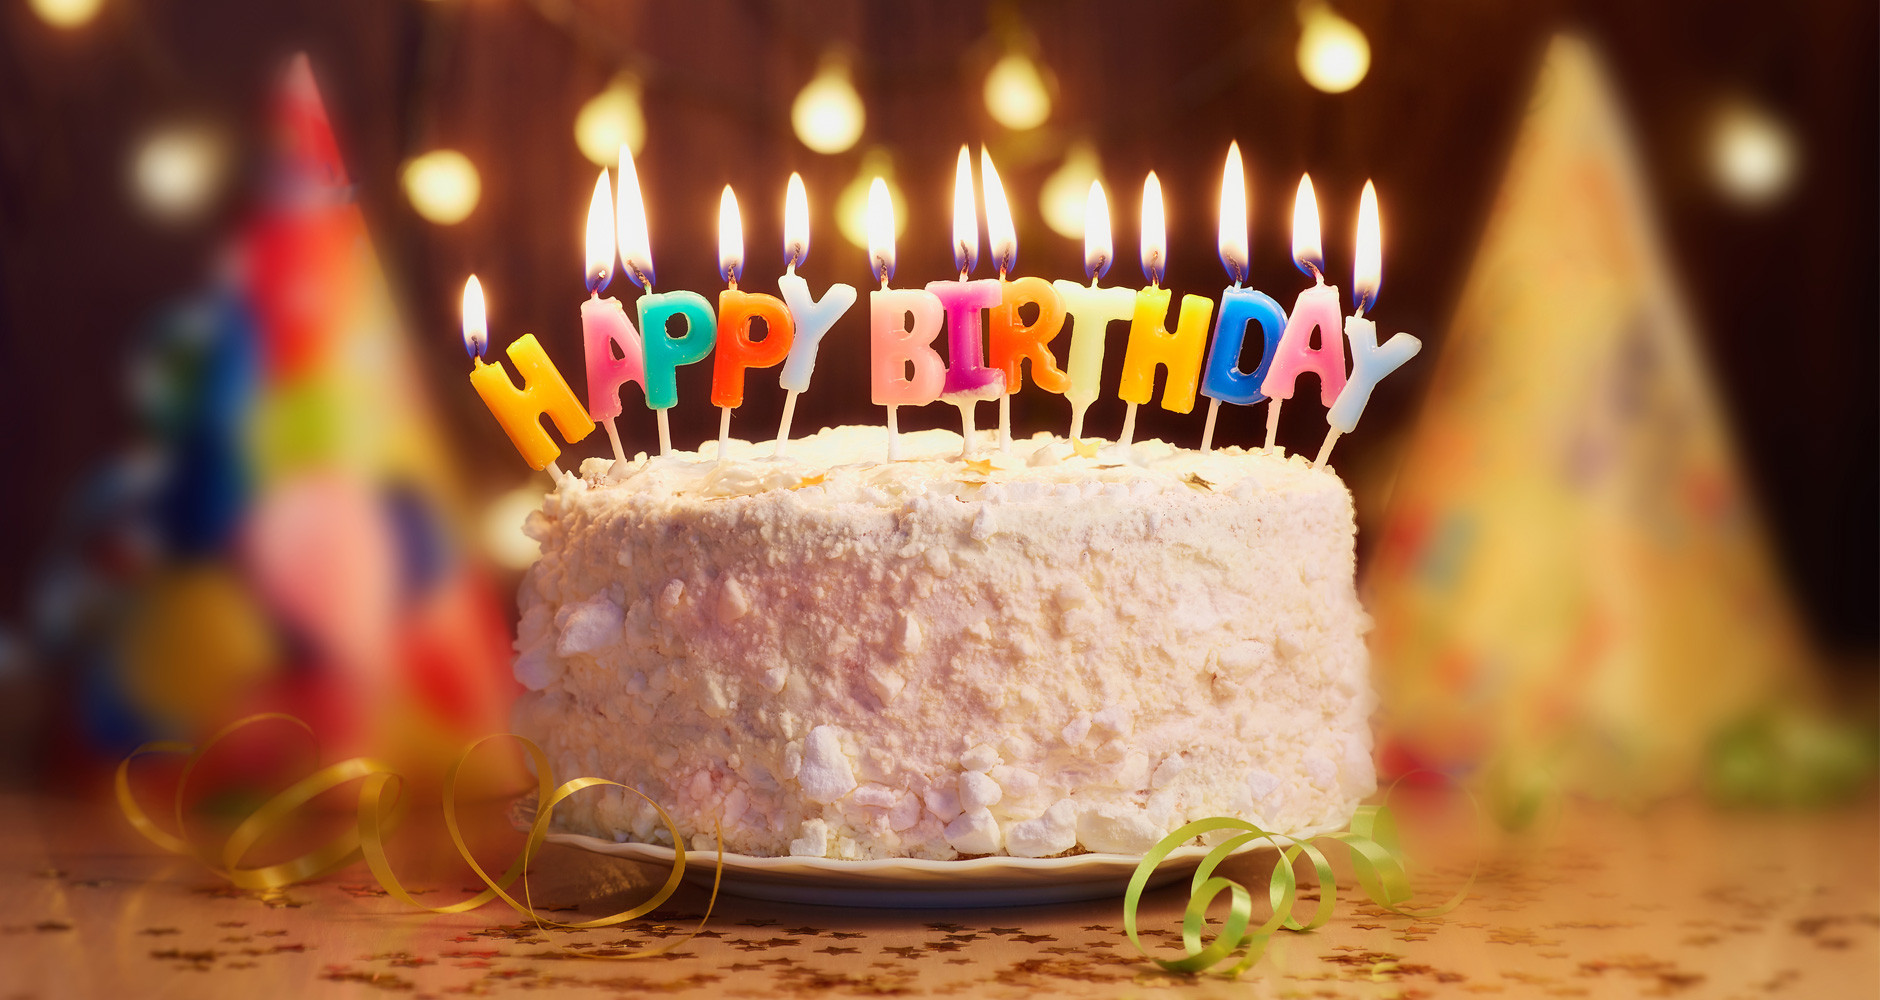 Birthday Cake Images
 Why A Cake Why Candles The History of Birthdays